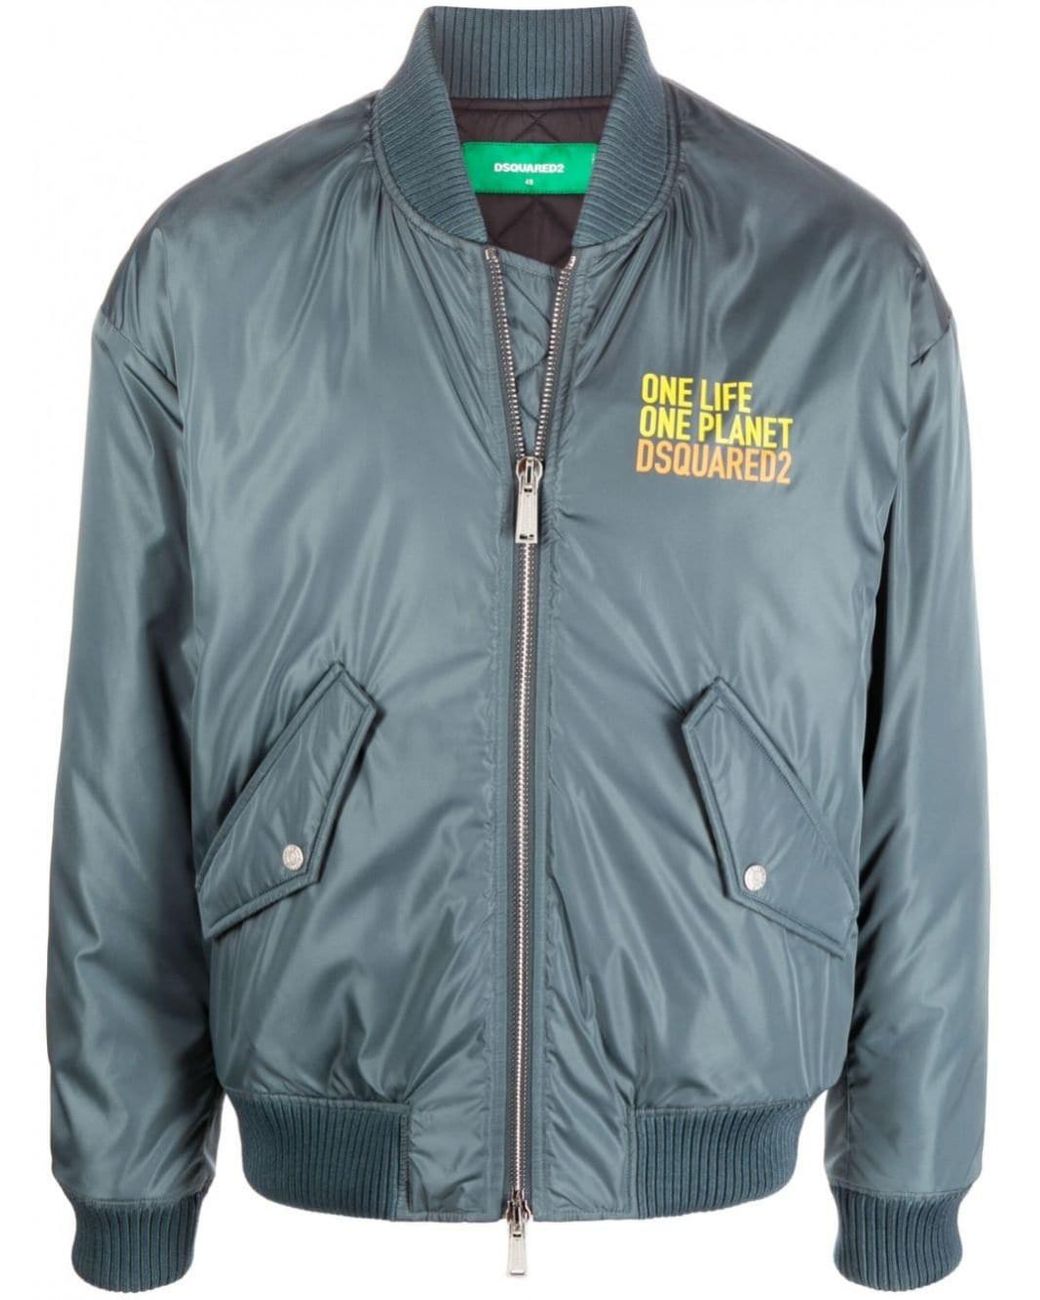 DSquared² One Life One Planet Motif Bomber Jacket in Blue for Men | Lyst